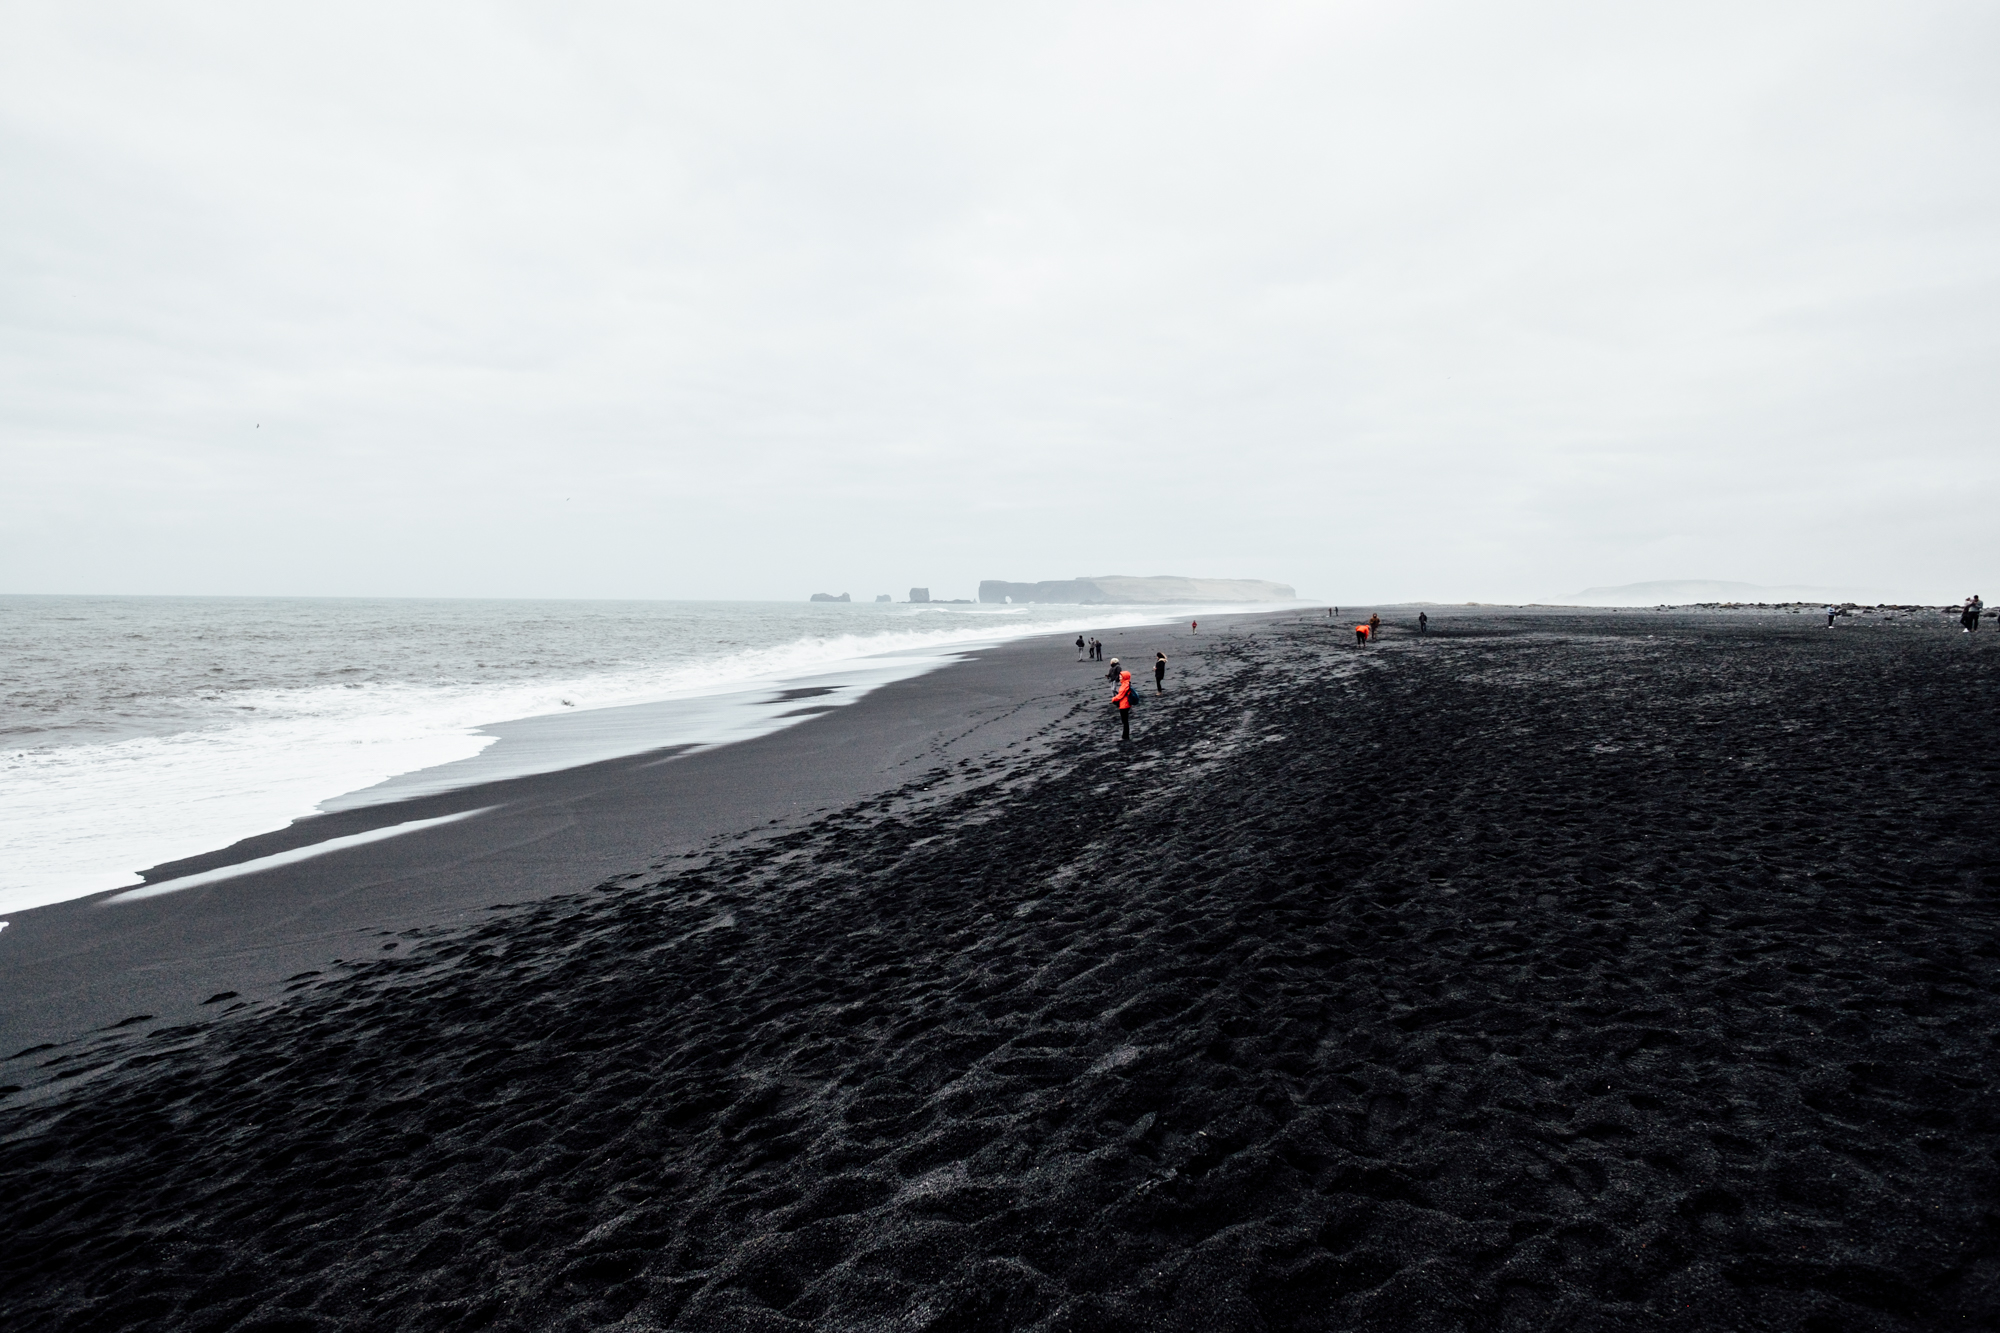  Looking out at the black sand beach. The sand here is such a intense deep black - it’s hard to describe without seeing it in person. 